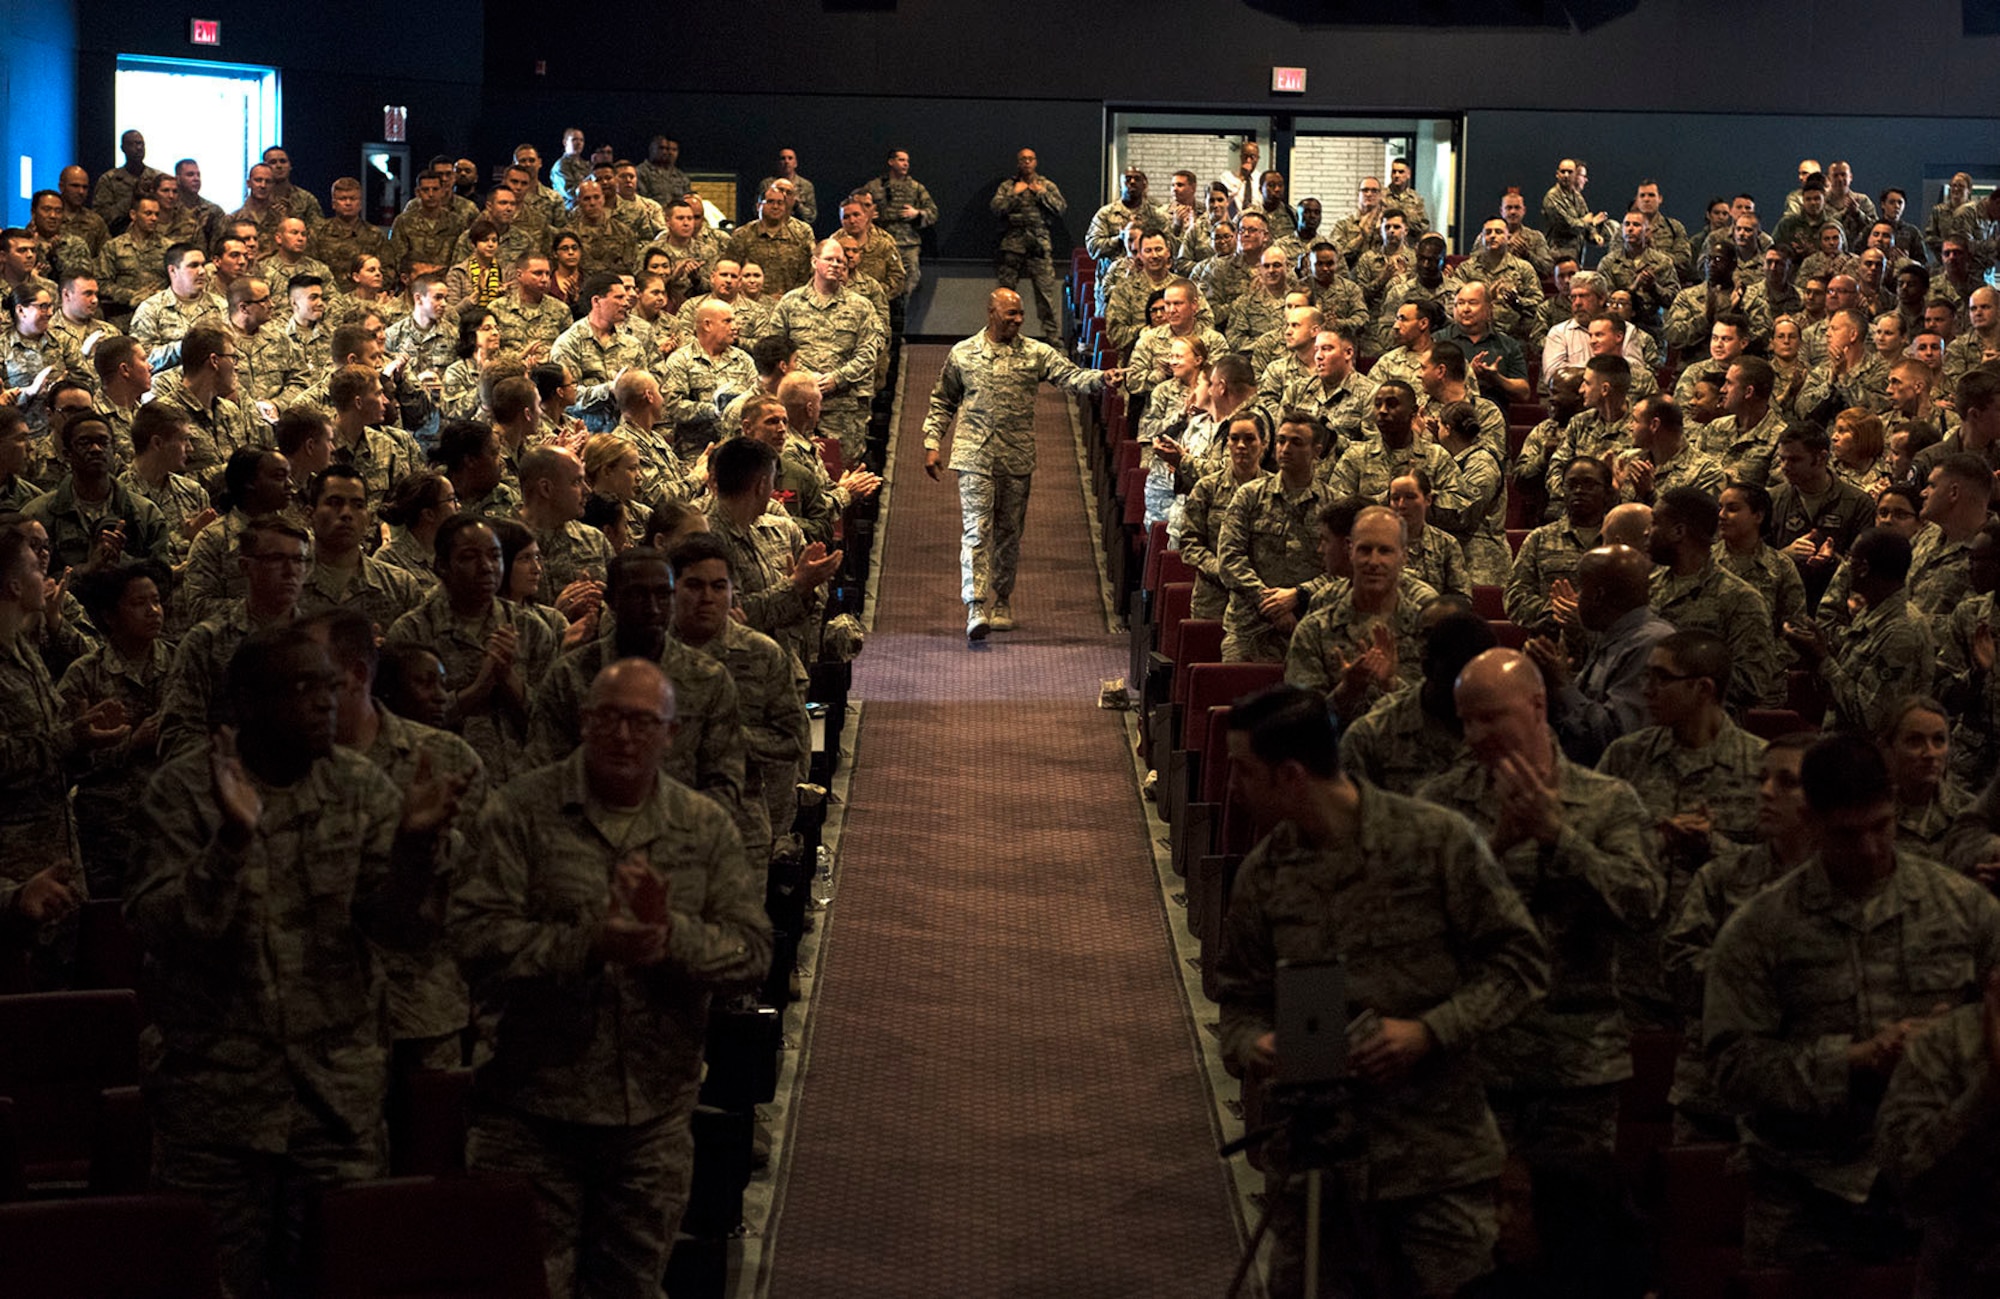 Chief Master Sgt. of the Air Force Kaleth O. Wright, makes his way down an aisle at the Sheppard Air Force Base, Texas, base theater during an "all call" assembly, Jan. 25, 2018. The CMSAF addressed issues that affect the lives of Airmen daily and also heard questions and concerns from some of those in attendance. (U.S. Air Force photo by Alan R. Quevy)